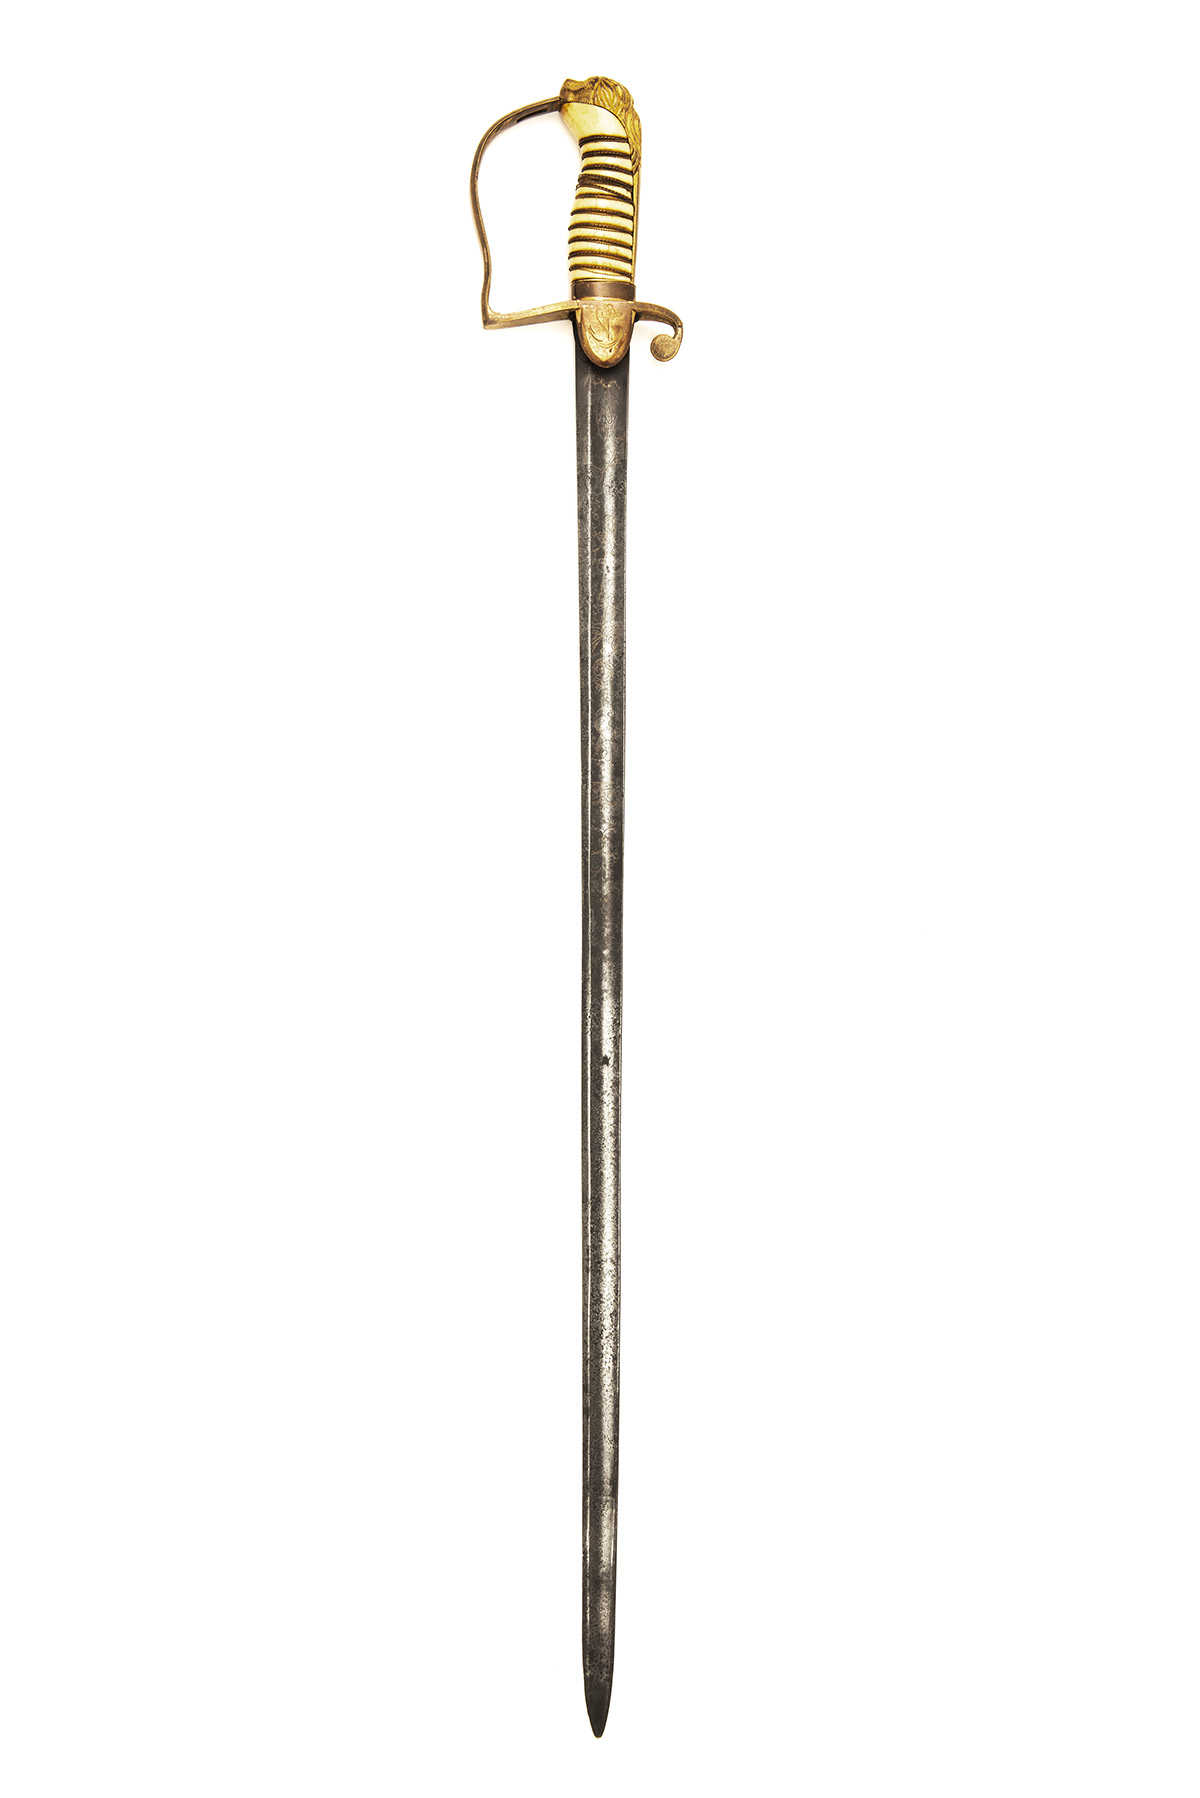 A BRITISH GEORGIAN NAVAL OFFICER'S SWORD WITH IVORY GRIP, circa 1788, with straight broad fullered